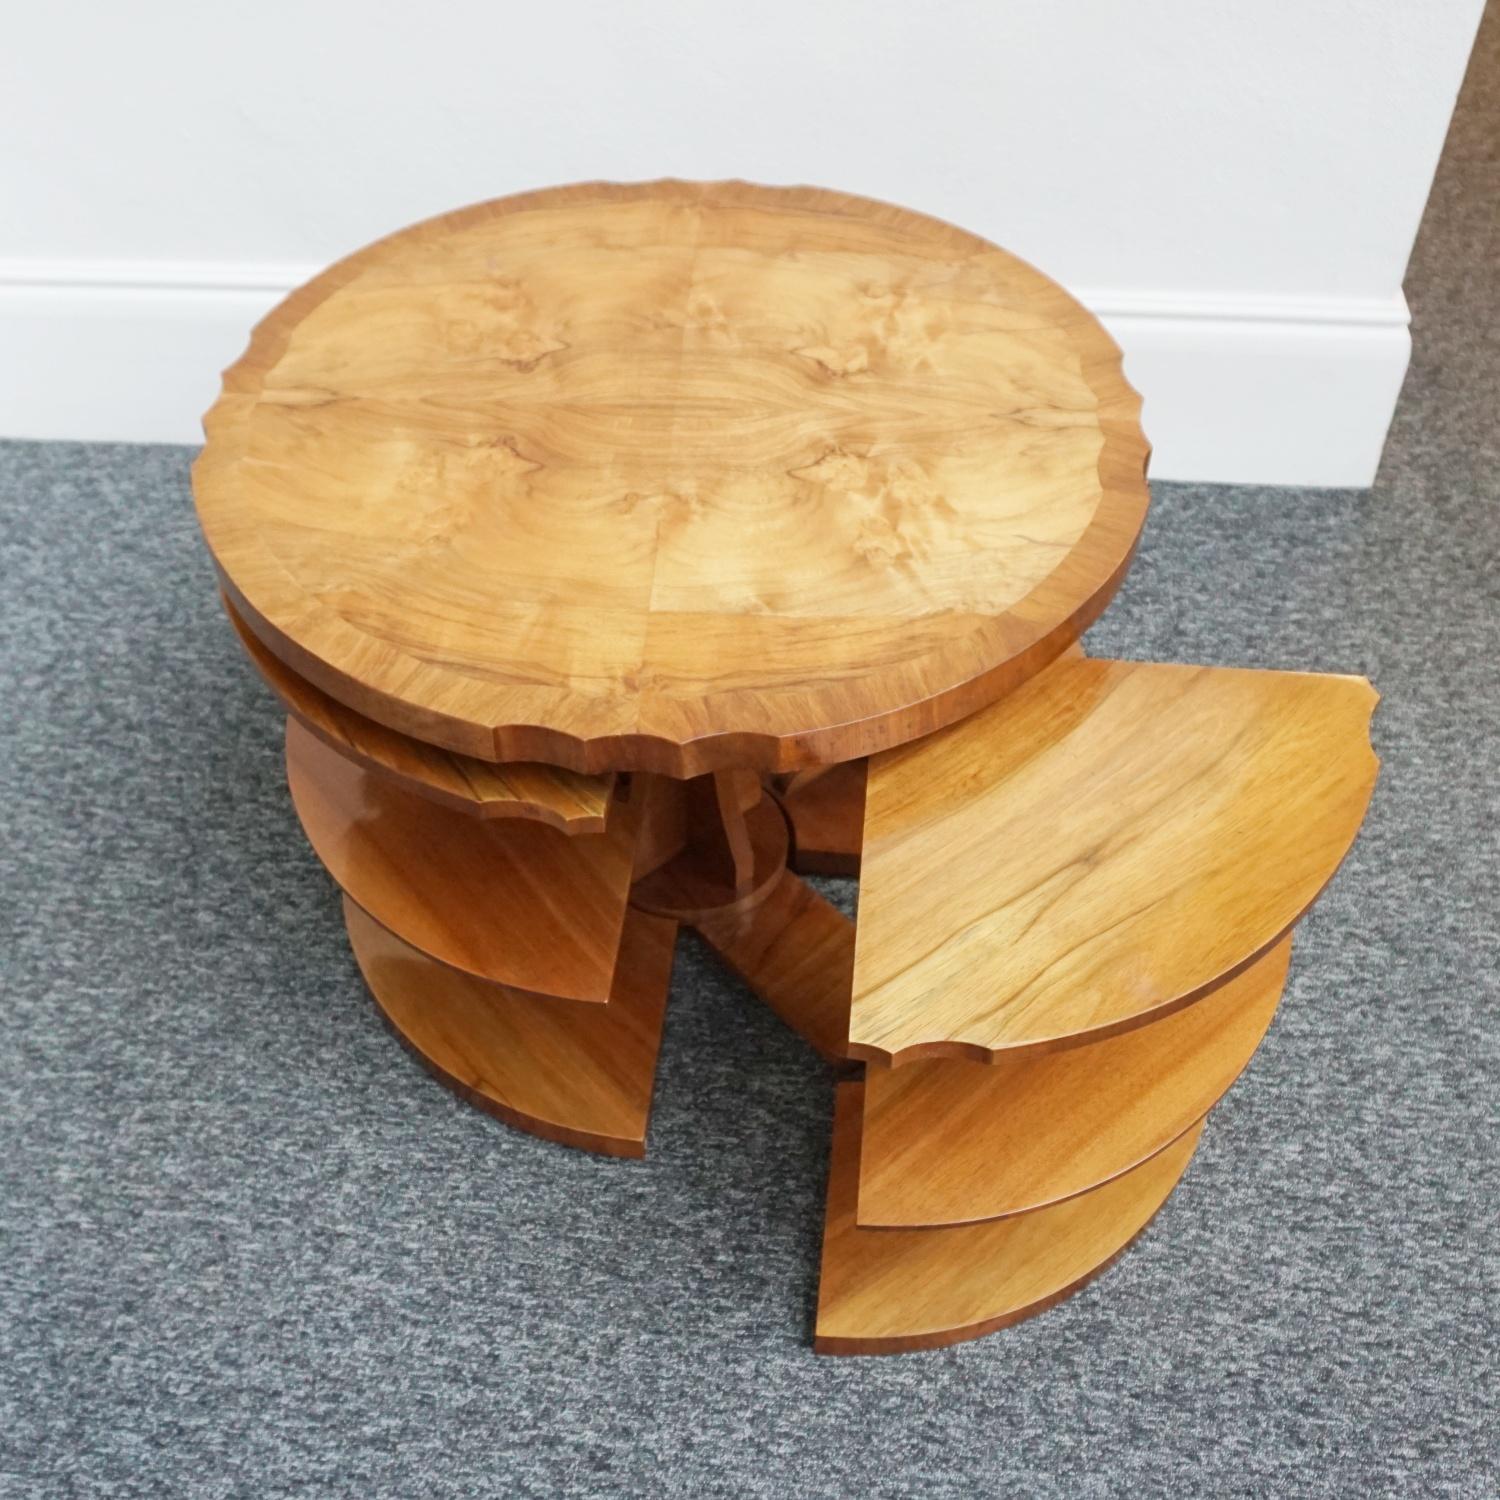 An Art Deco nest of tables by Harry & Lou Epstein. Burr walnut veneered with figured walnut banding. Curved edges to table top with four integral side tables. Cross-footed figured walnut base. 

Dimensions: D 76cm H 56cm Nest H 49cm Nest W 51cm D